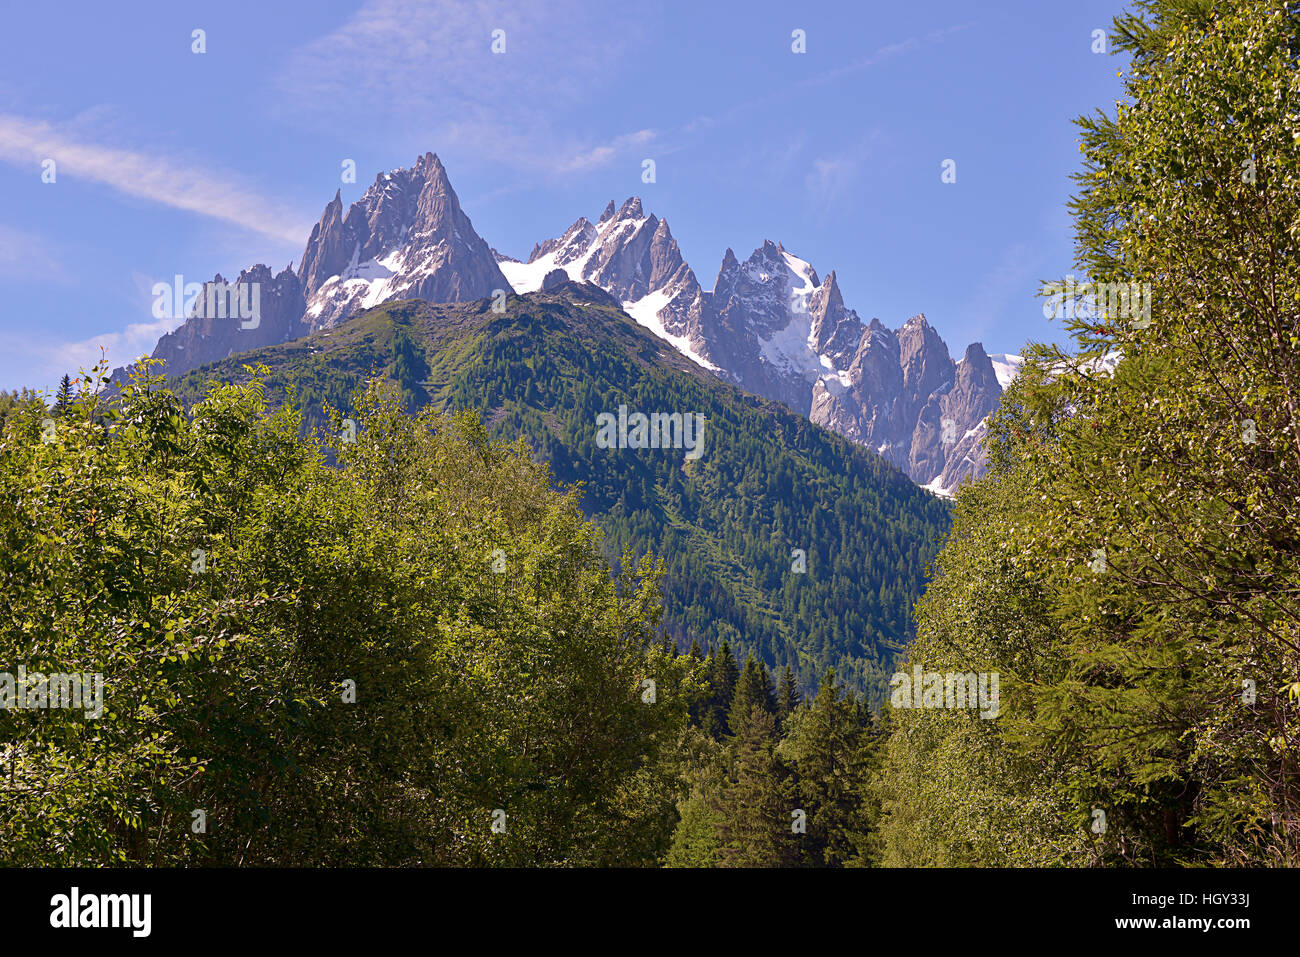 Mountain and trees at Le Lavancher, commune near of Chamonix in the French Alps in the Haute-Savoie department of France Stock Photo